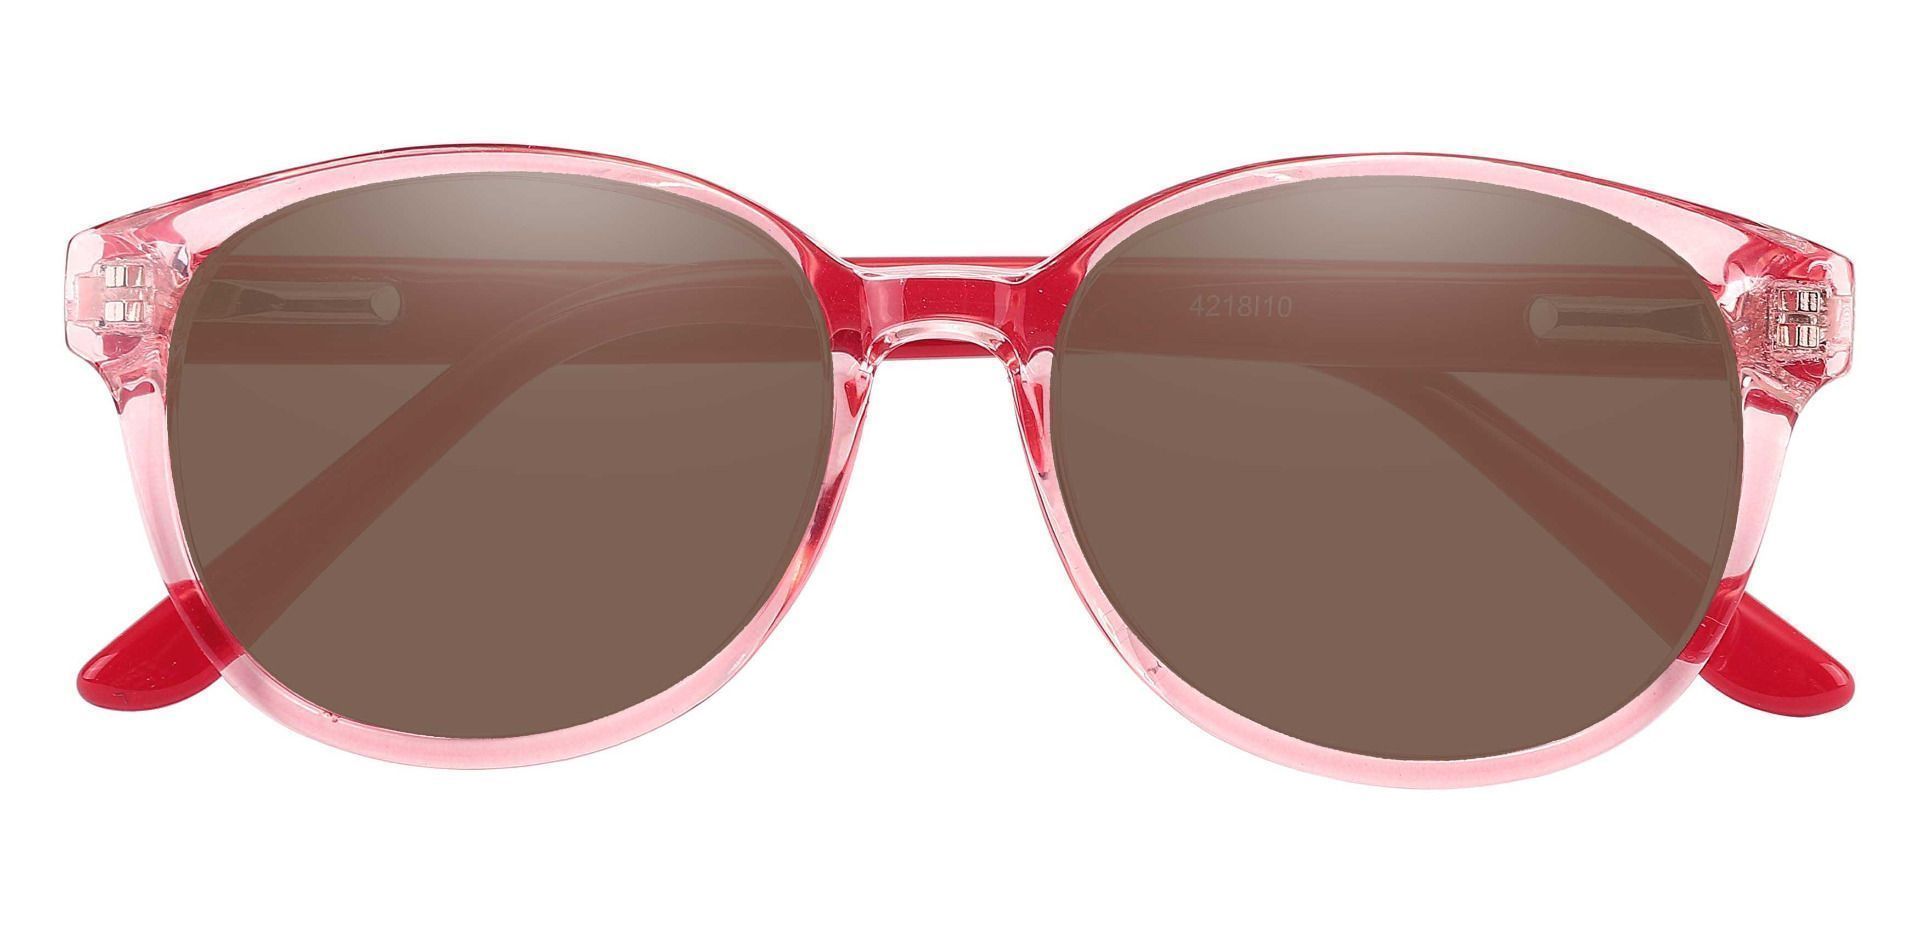 Libby Oval Prescription Sunglasses - Pink Frame With Brown Lenses